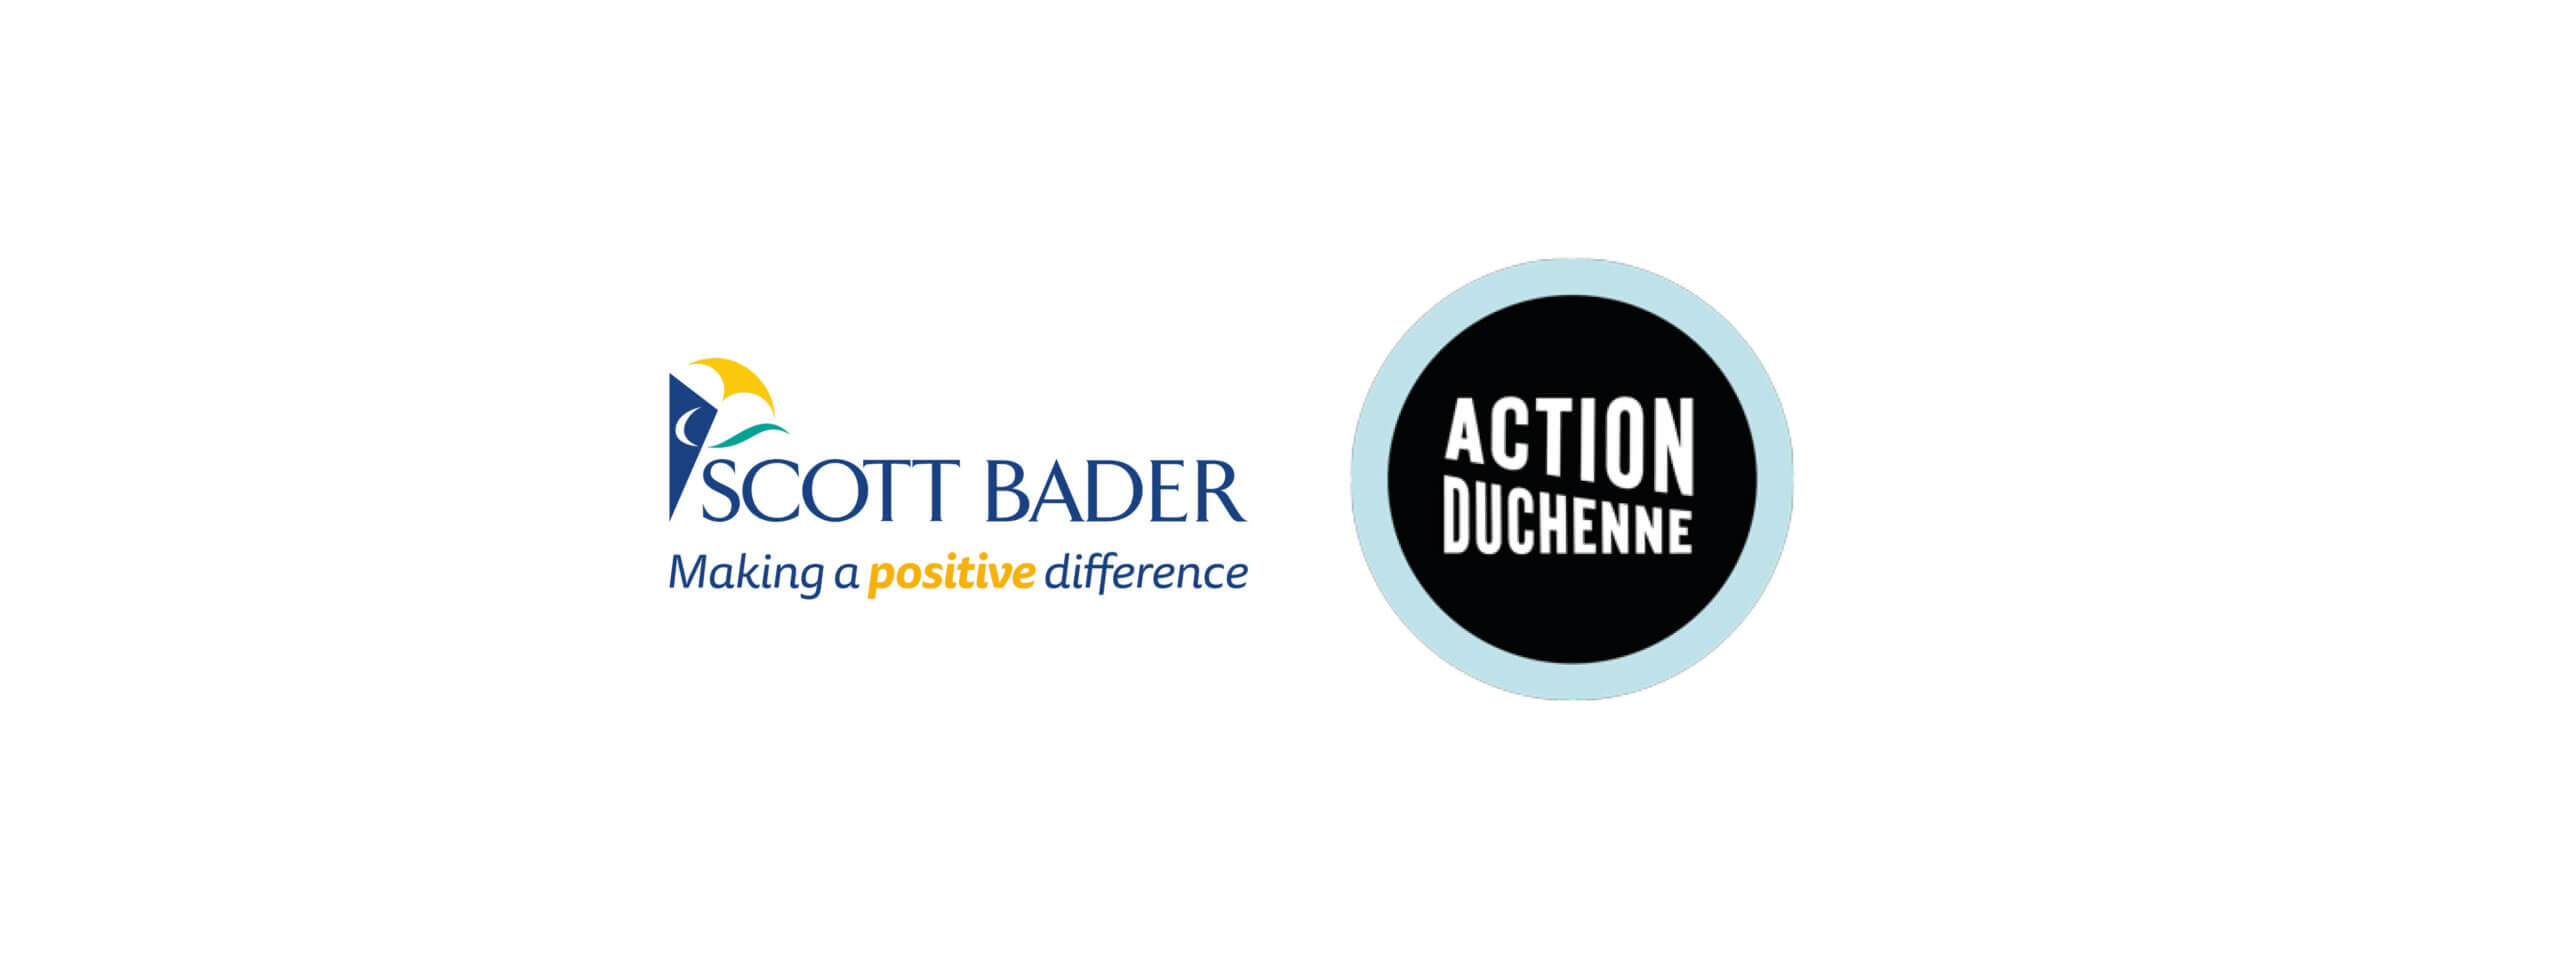 Scott Bader UK cycle team to complete 416 miles in 4 days for Action Duchenne